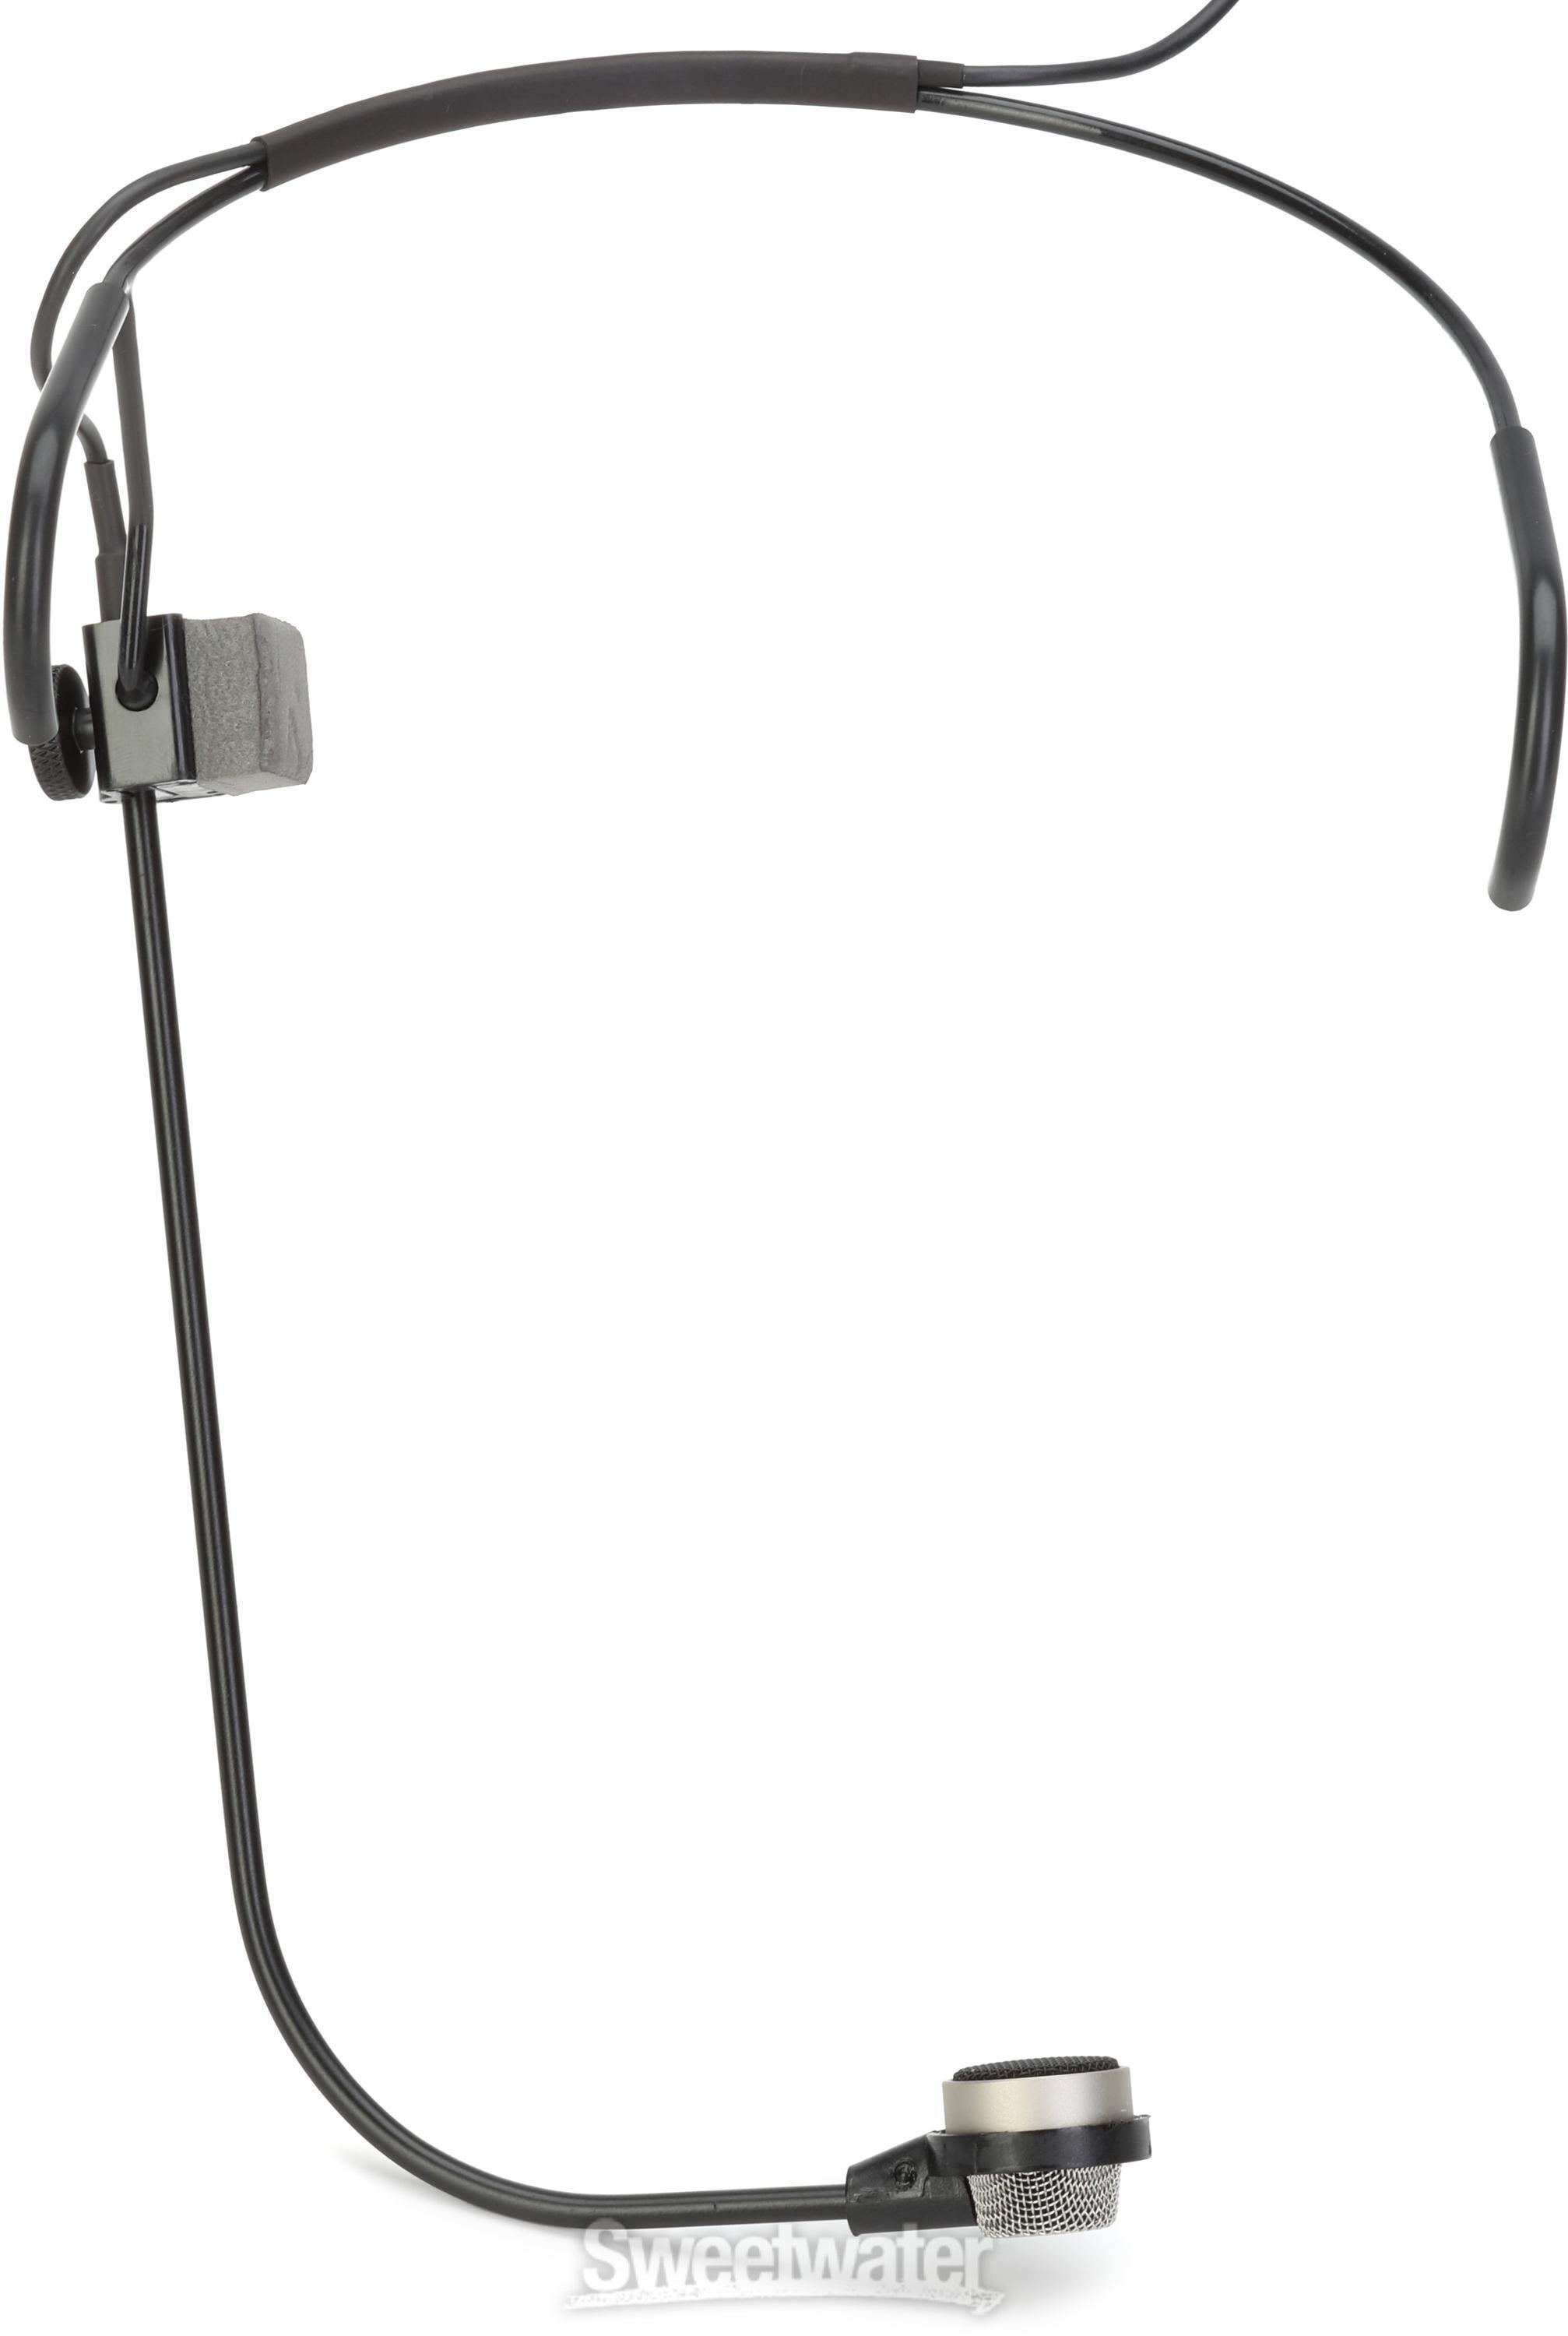 Crown CM311 AESH Headworn Microphone for Shure Wireless | Sweetwater